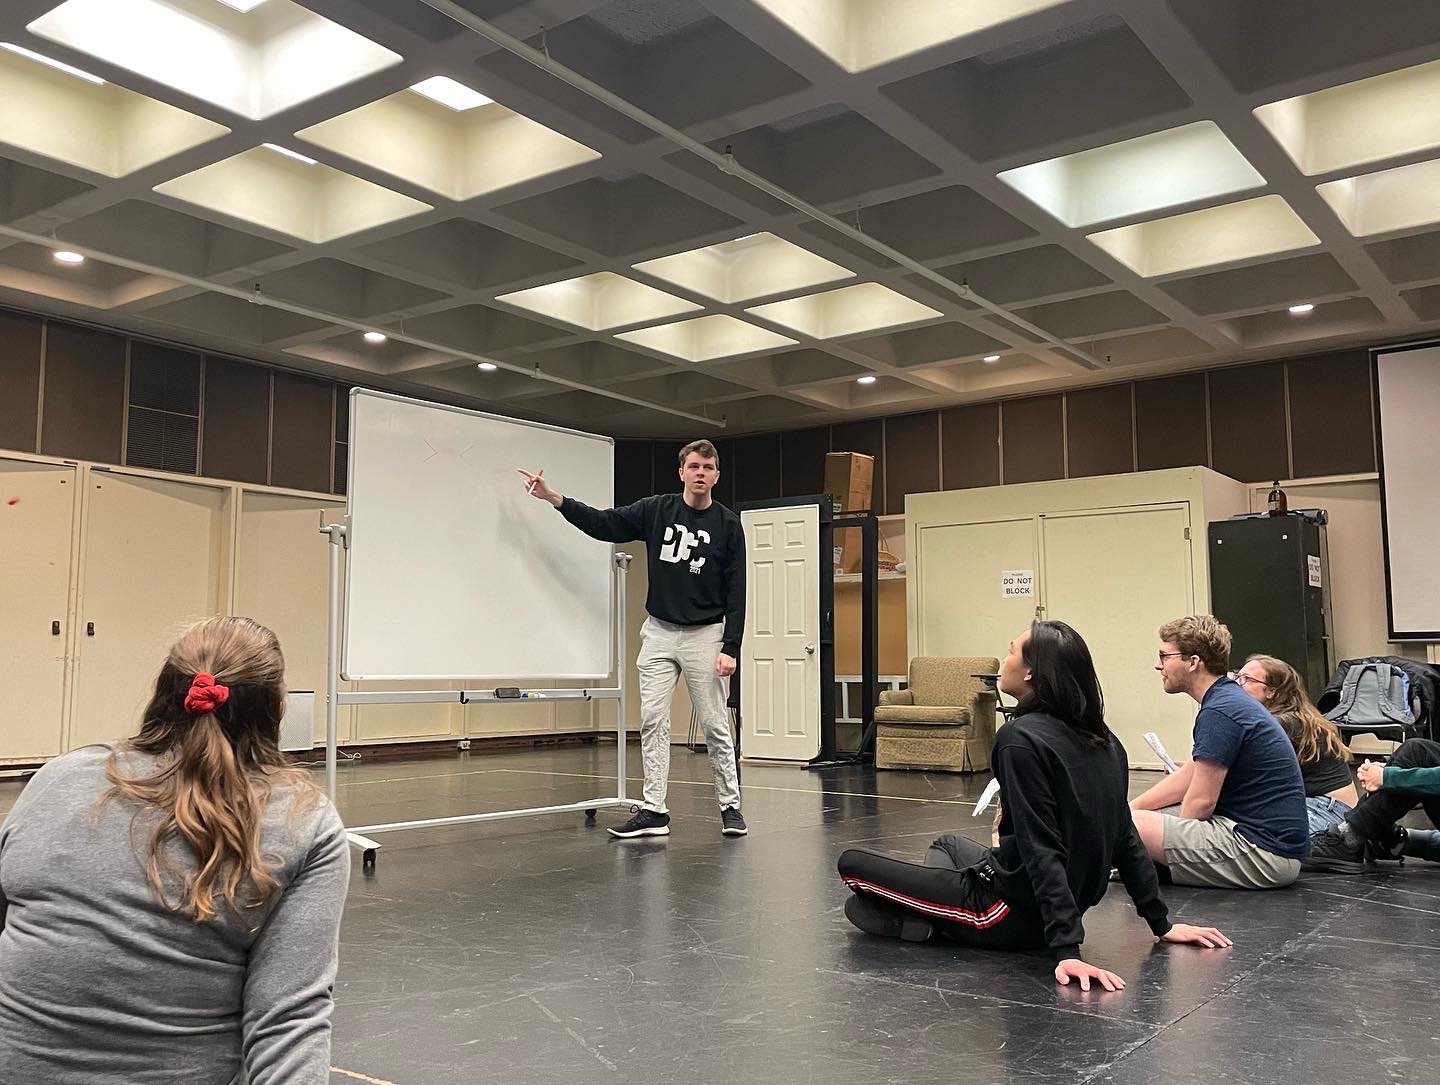 Members of the Glee Club workshopping its 2023 Spring Show, an original jukebox musical.